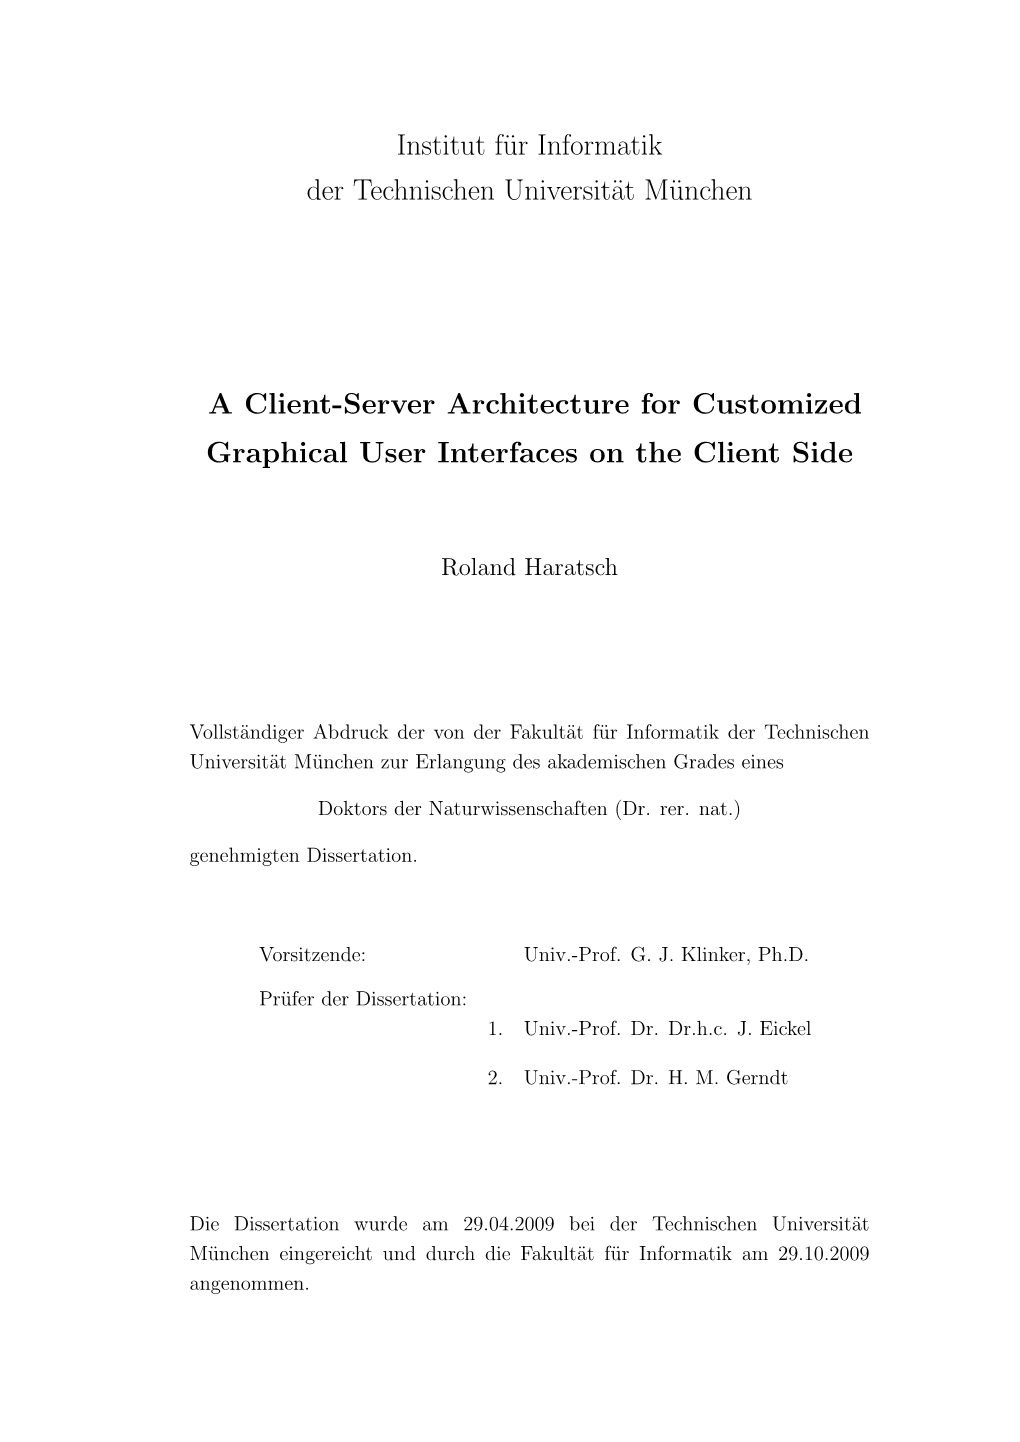 A Client-Server Architecture for Customized Graphical User Interfaces on the Client Side